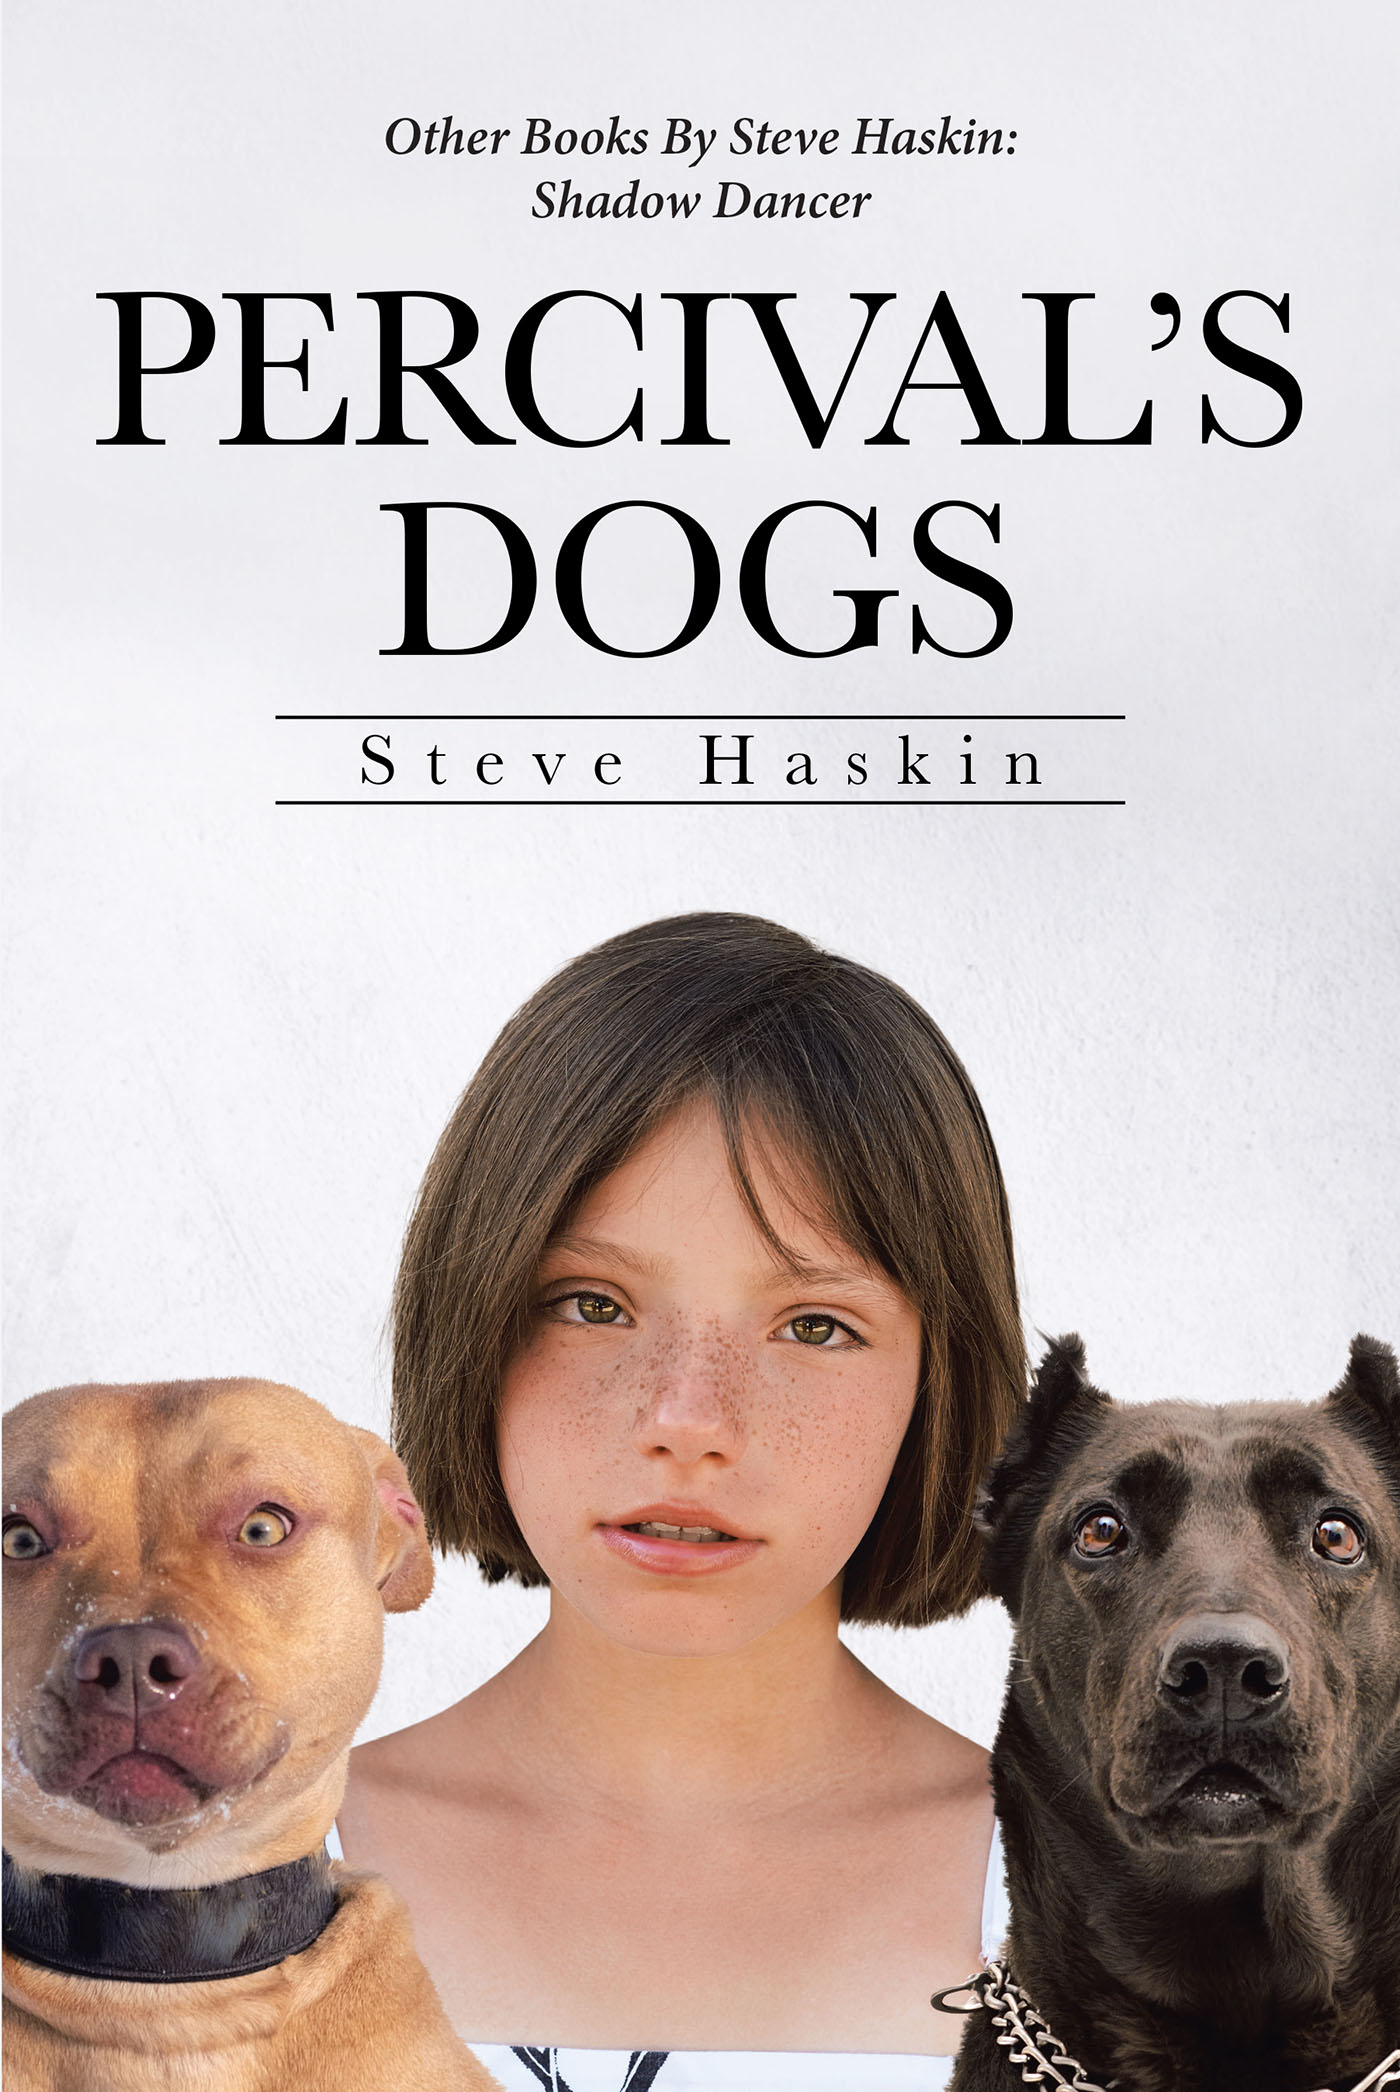 Author Steve Haskin’s New Book, "Percival’s Dogs," is a Timeless Coming-of-Age Story Following a Courageous Young Girl Determined to Save Abused Dogs in Her Arkansas Town